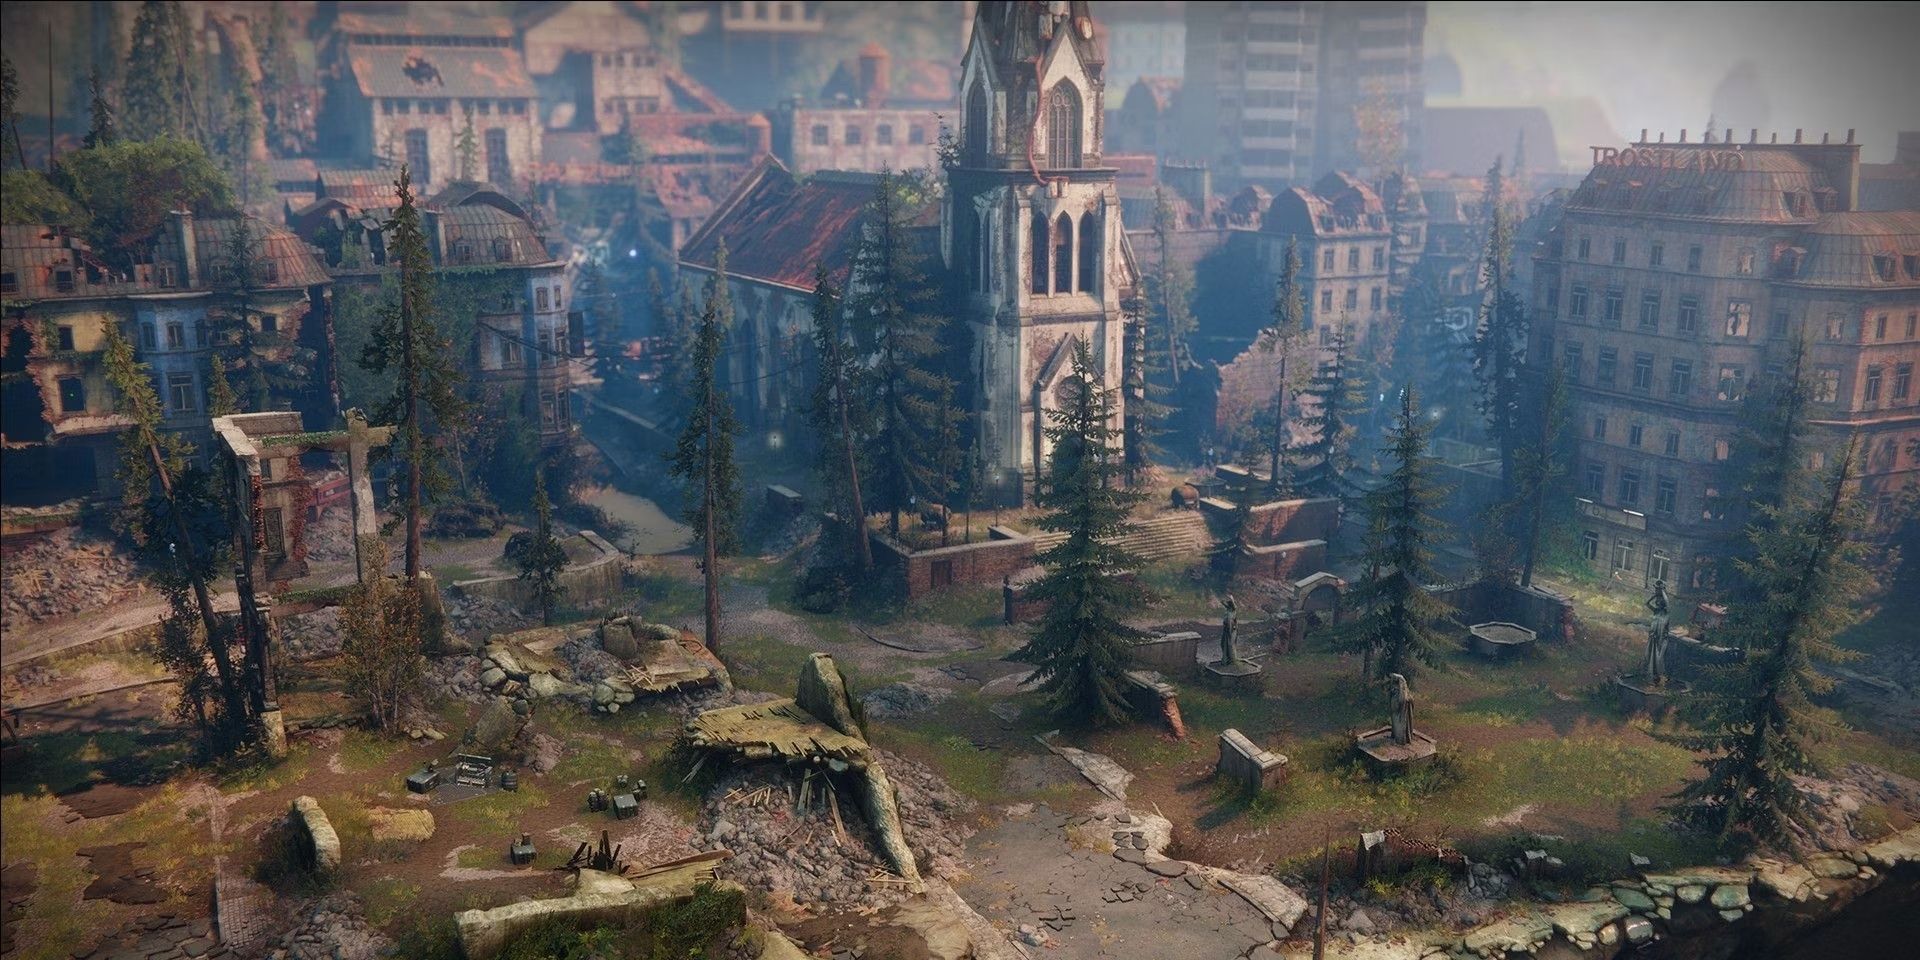 An aerial shot of Destiny 2's Trostland Area in the EDZ, showing the main church in the middle surrounded by ruins of buildings and overgrowing vegetation around it.